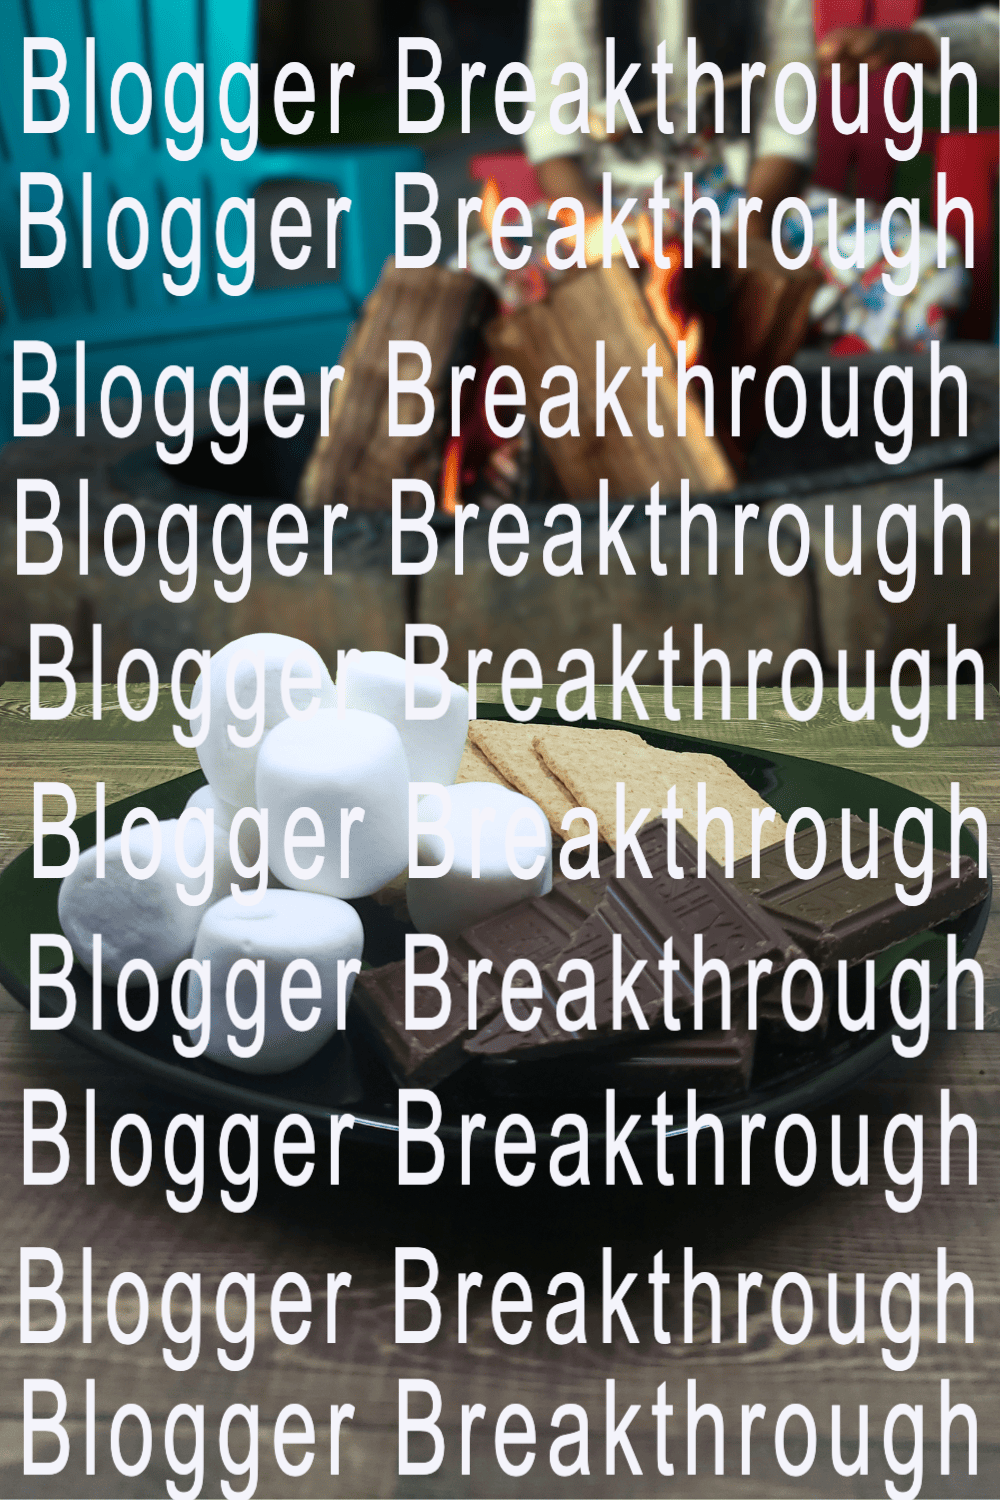 Text overlay &quot;blogger breakthrough&quot; on a high-quality Summer Themed Stock Photo (set of 10) of a mouse and keyboard from Blogger Breakthrough Summit.